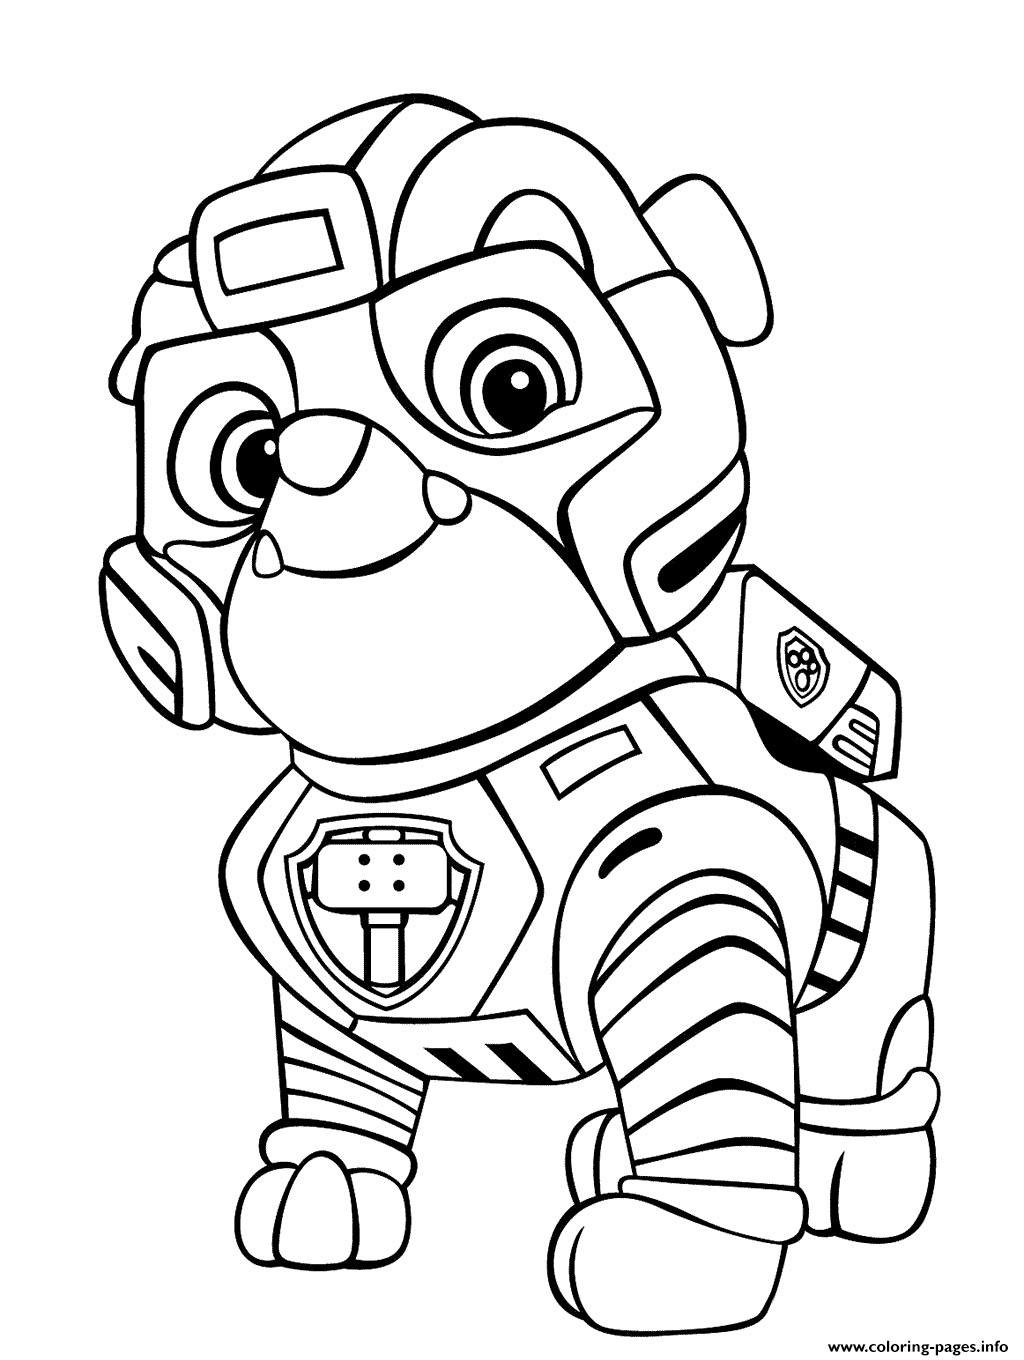 Free Download Mighty Pups Coloring Pages in 2020 | Paw patrol coloring pages,  Paw patrol badge printable, Paw patrol coloring